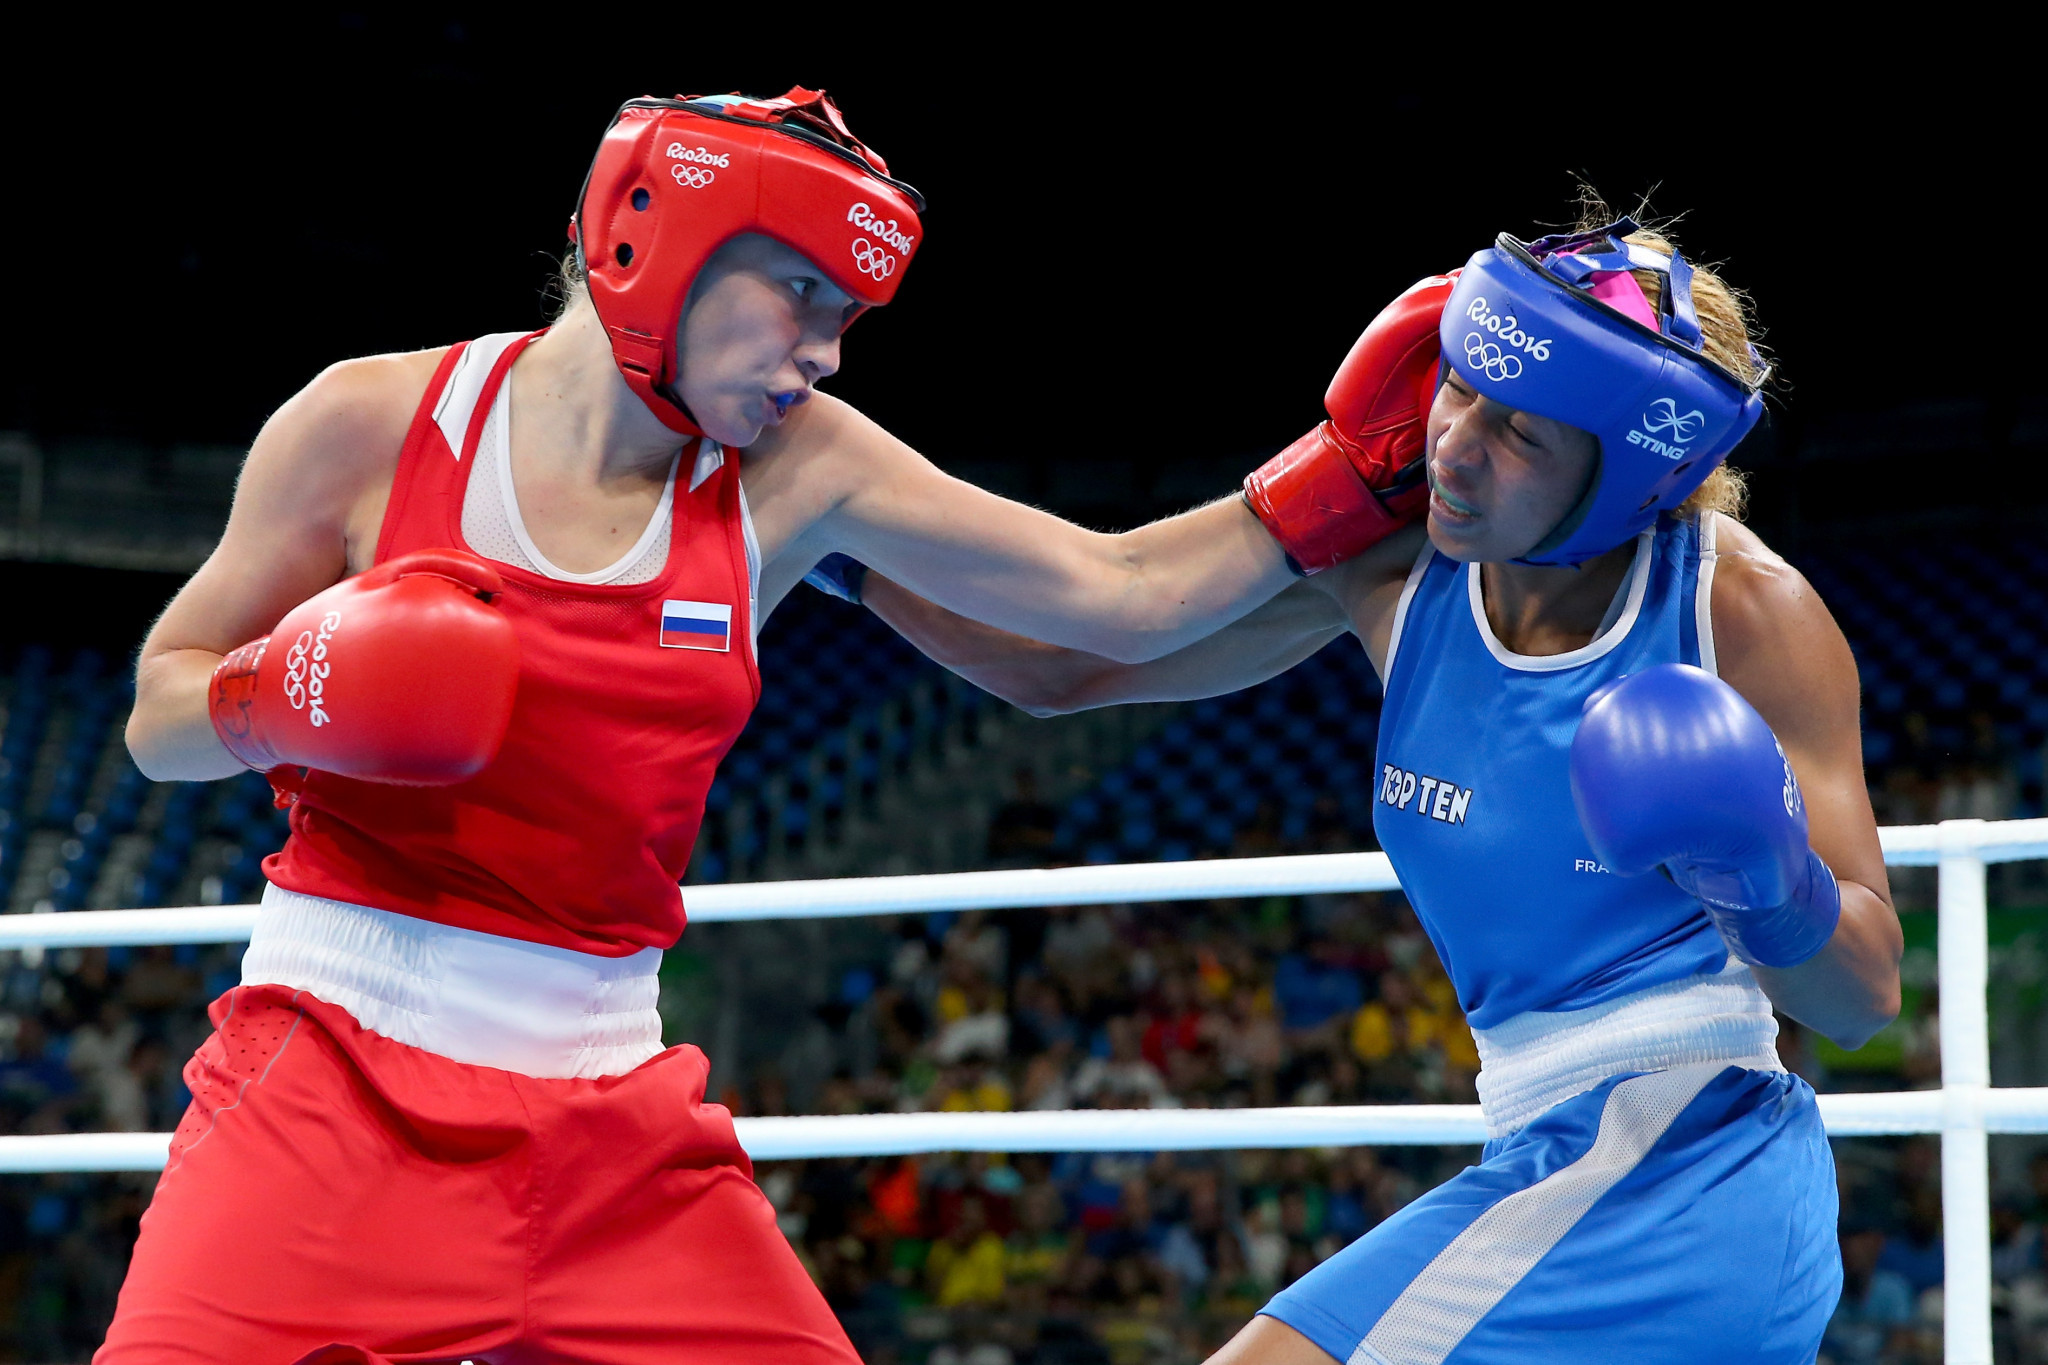 The row within AIBA following its suspension by the IOC has intensified ©Getty Images